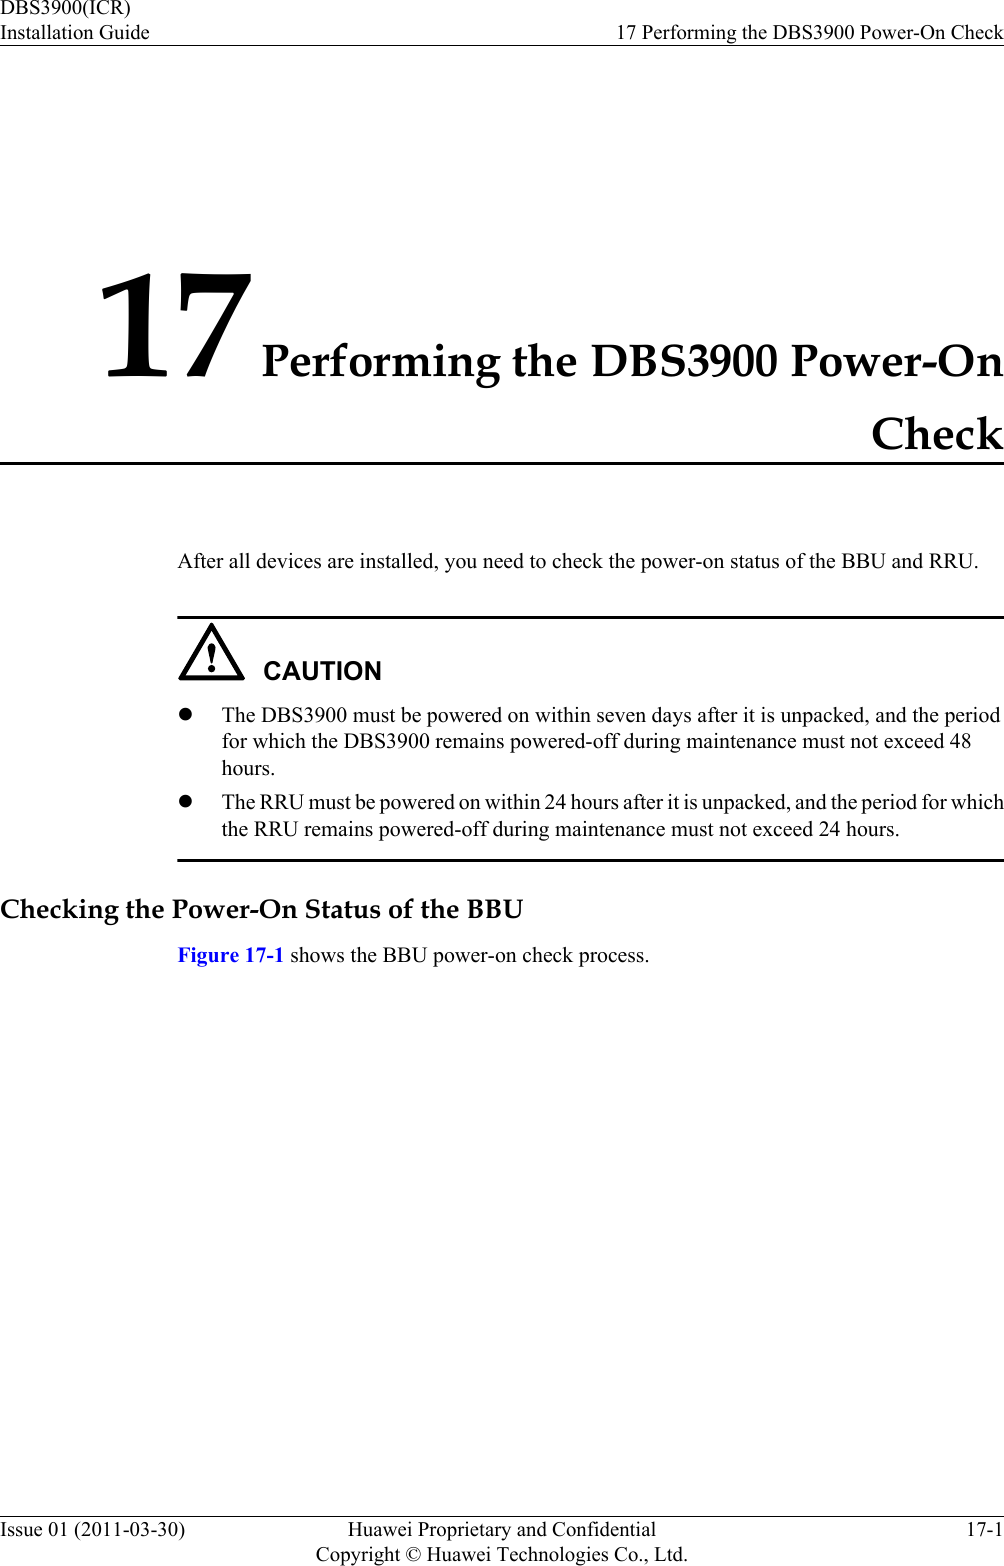 17 Performing the DBS3900 Power-OnCheckAfter all devices are installed, you need to check the power-on status of the BBU and RRU.CAUTIONlThe DBS3900 must be powered on within seven days after it is unpacked, and the periodfor which the DBS3900 remains powered-off during maintenance must not exceed 48hours.lThe RRU must be powered on within 24 hours after it is unpacked, and the period for whichthe RRU remains powered-off during maintenance must not exceed 24 hours.Checking the Power-On Status of the BBUFigure 17-1 shows the BBU power-on check process.DBS3900(ICR)Installation Guide 17 Performing the DBS3900 Power-On CheckIssue 01 (2011-03-30) Huawei Proprietary and ConfidentialCopyright © Huawei Technologies Co., Ltd.17-1